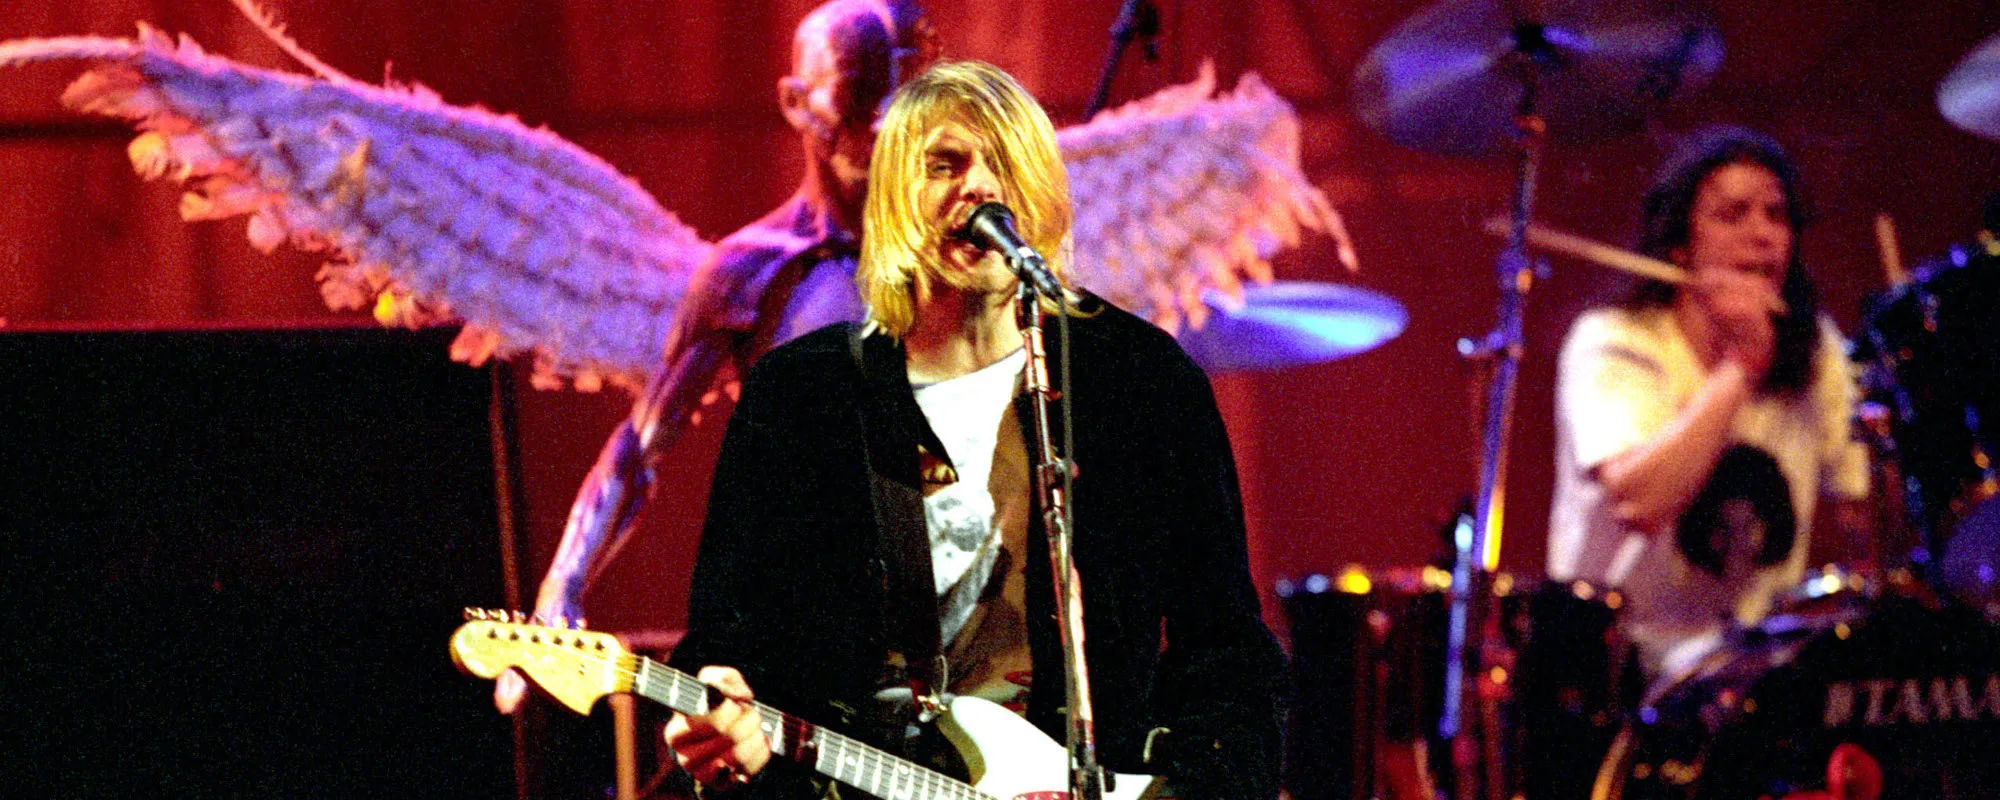 Watch Nirvana’s Psychedelic Visualizer for Remastered “Dumb”